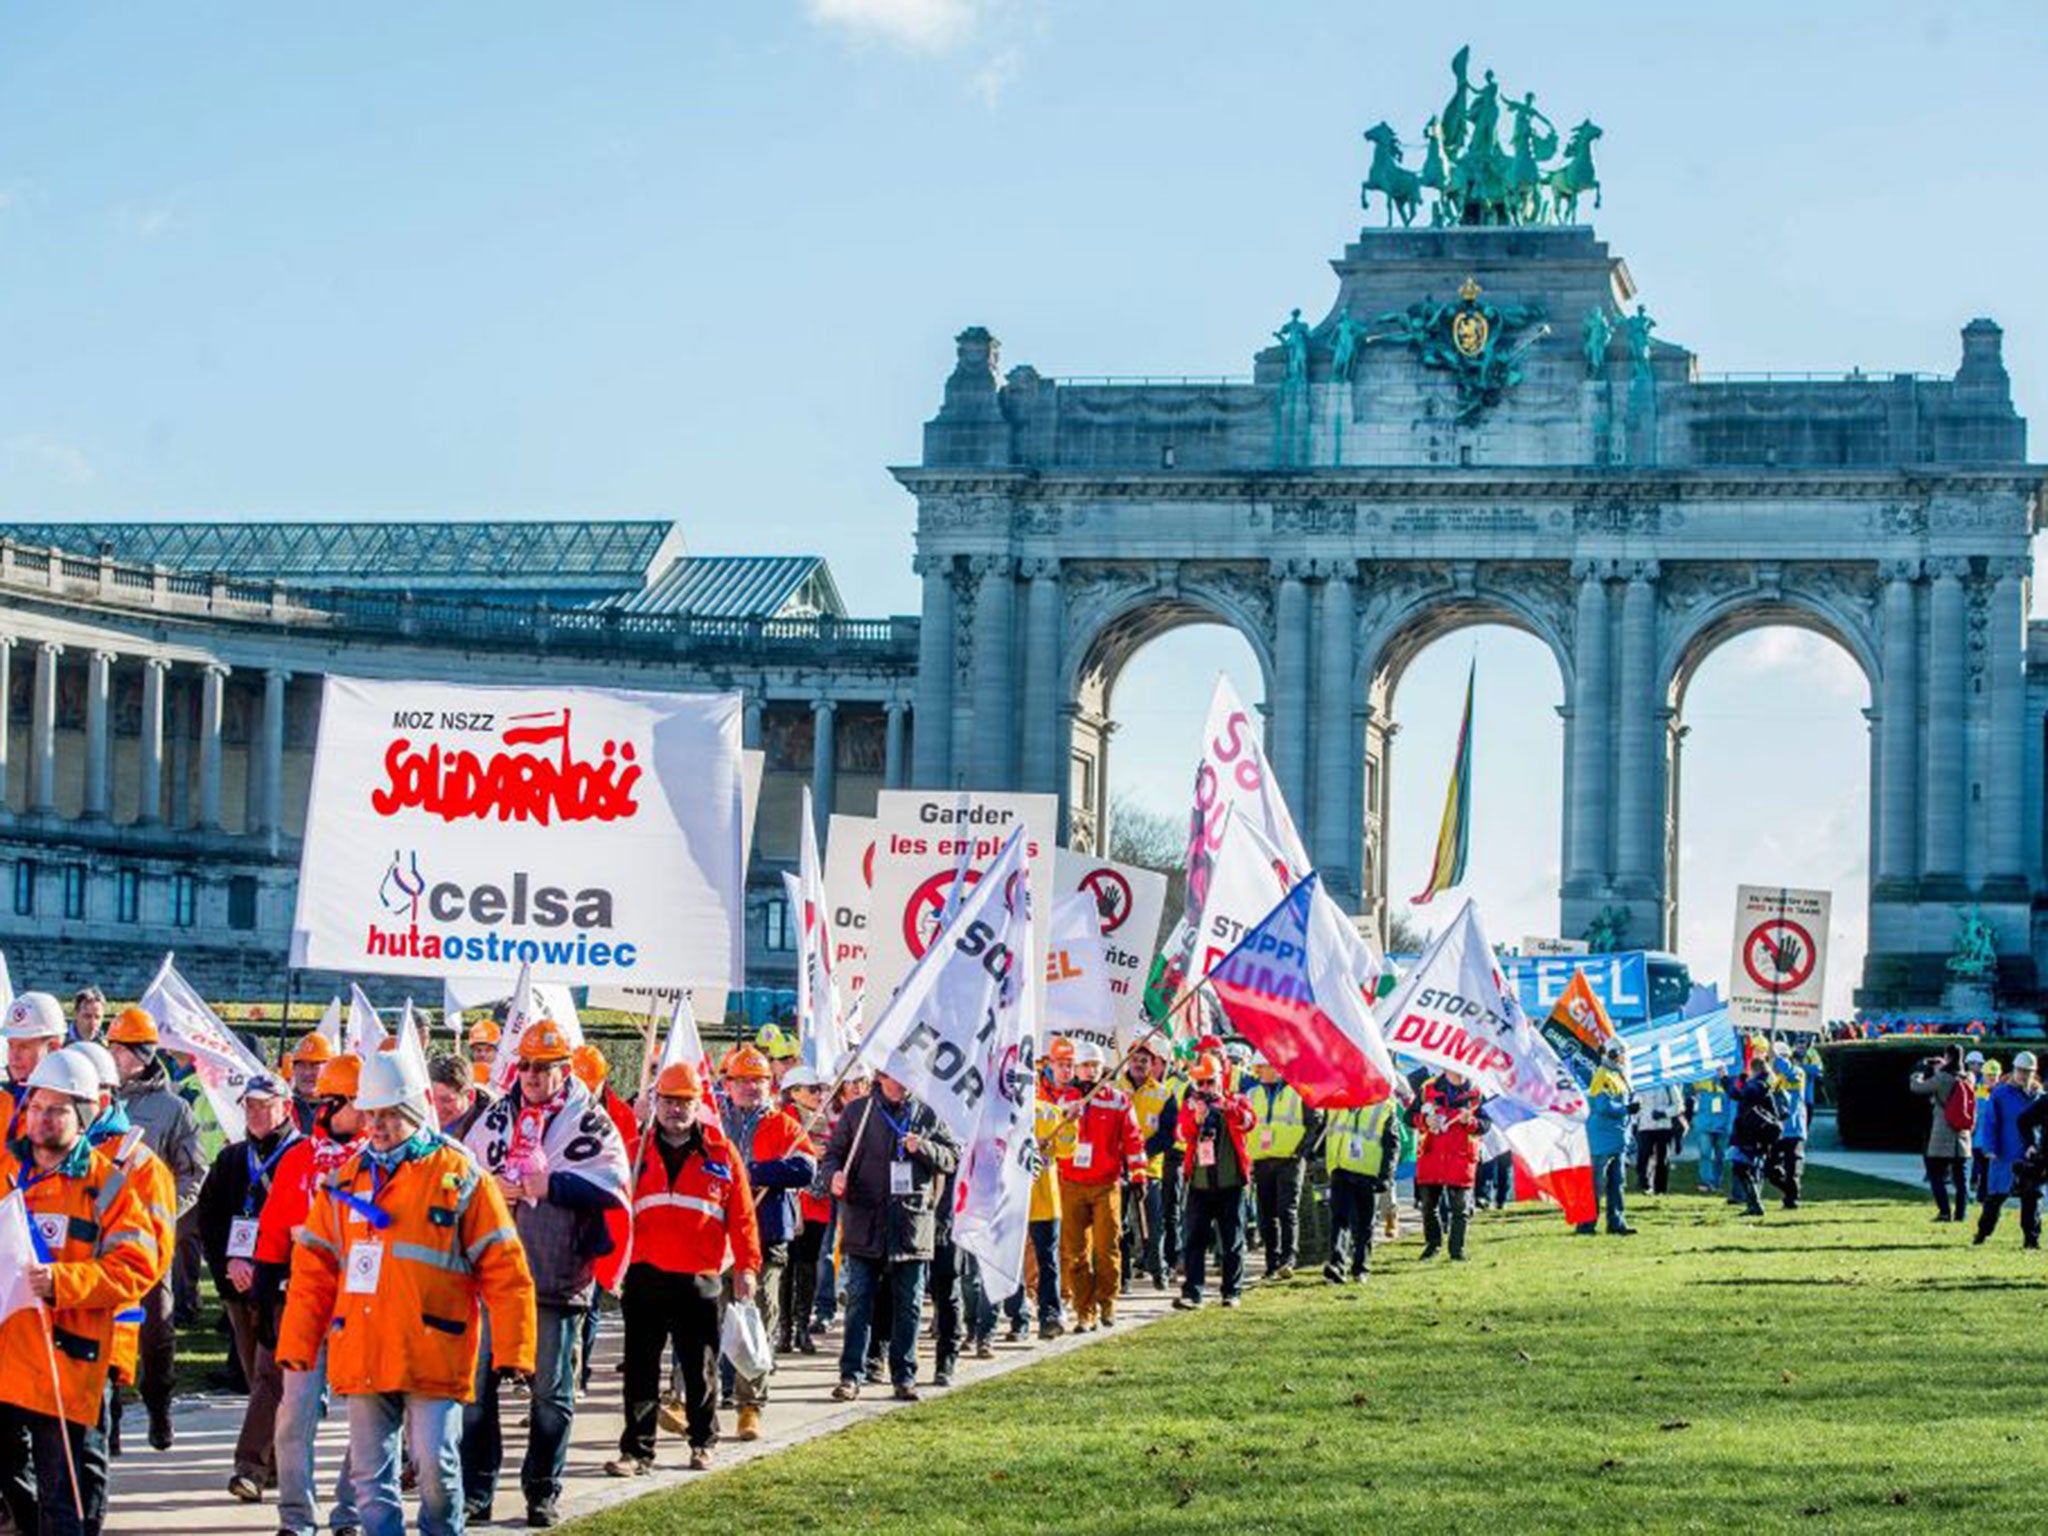 Steel workers march through the Arcade du Cinquantenair in Brussels